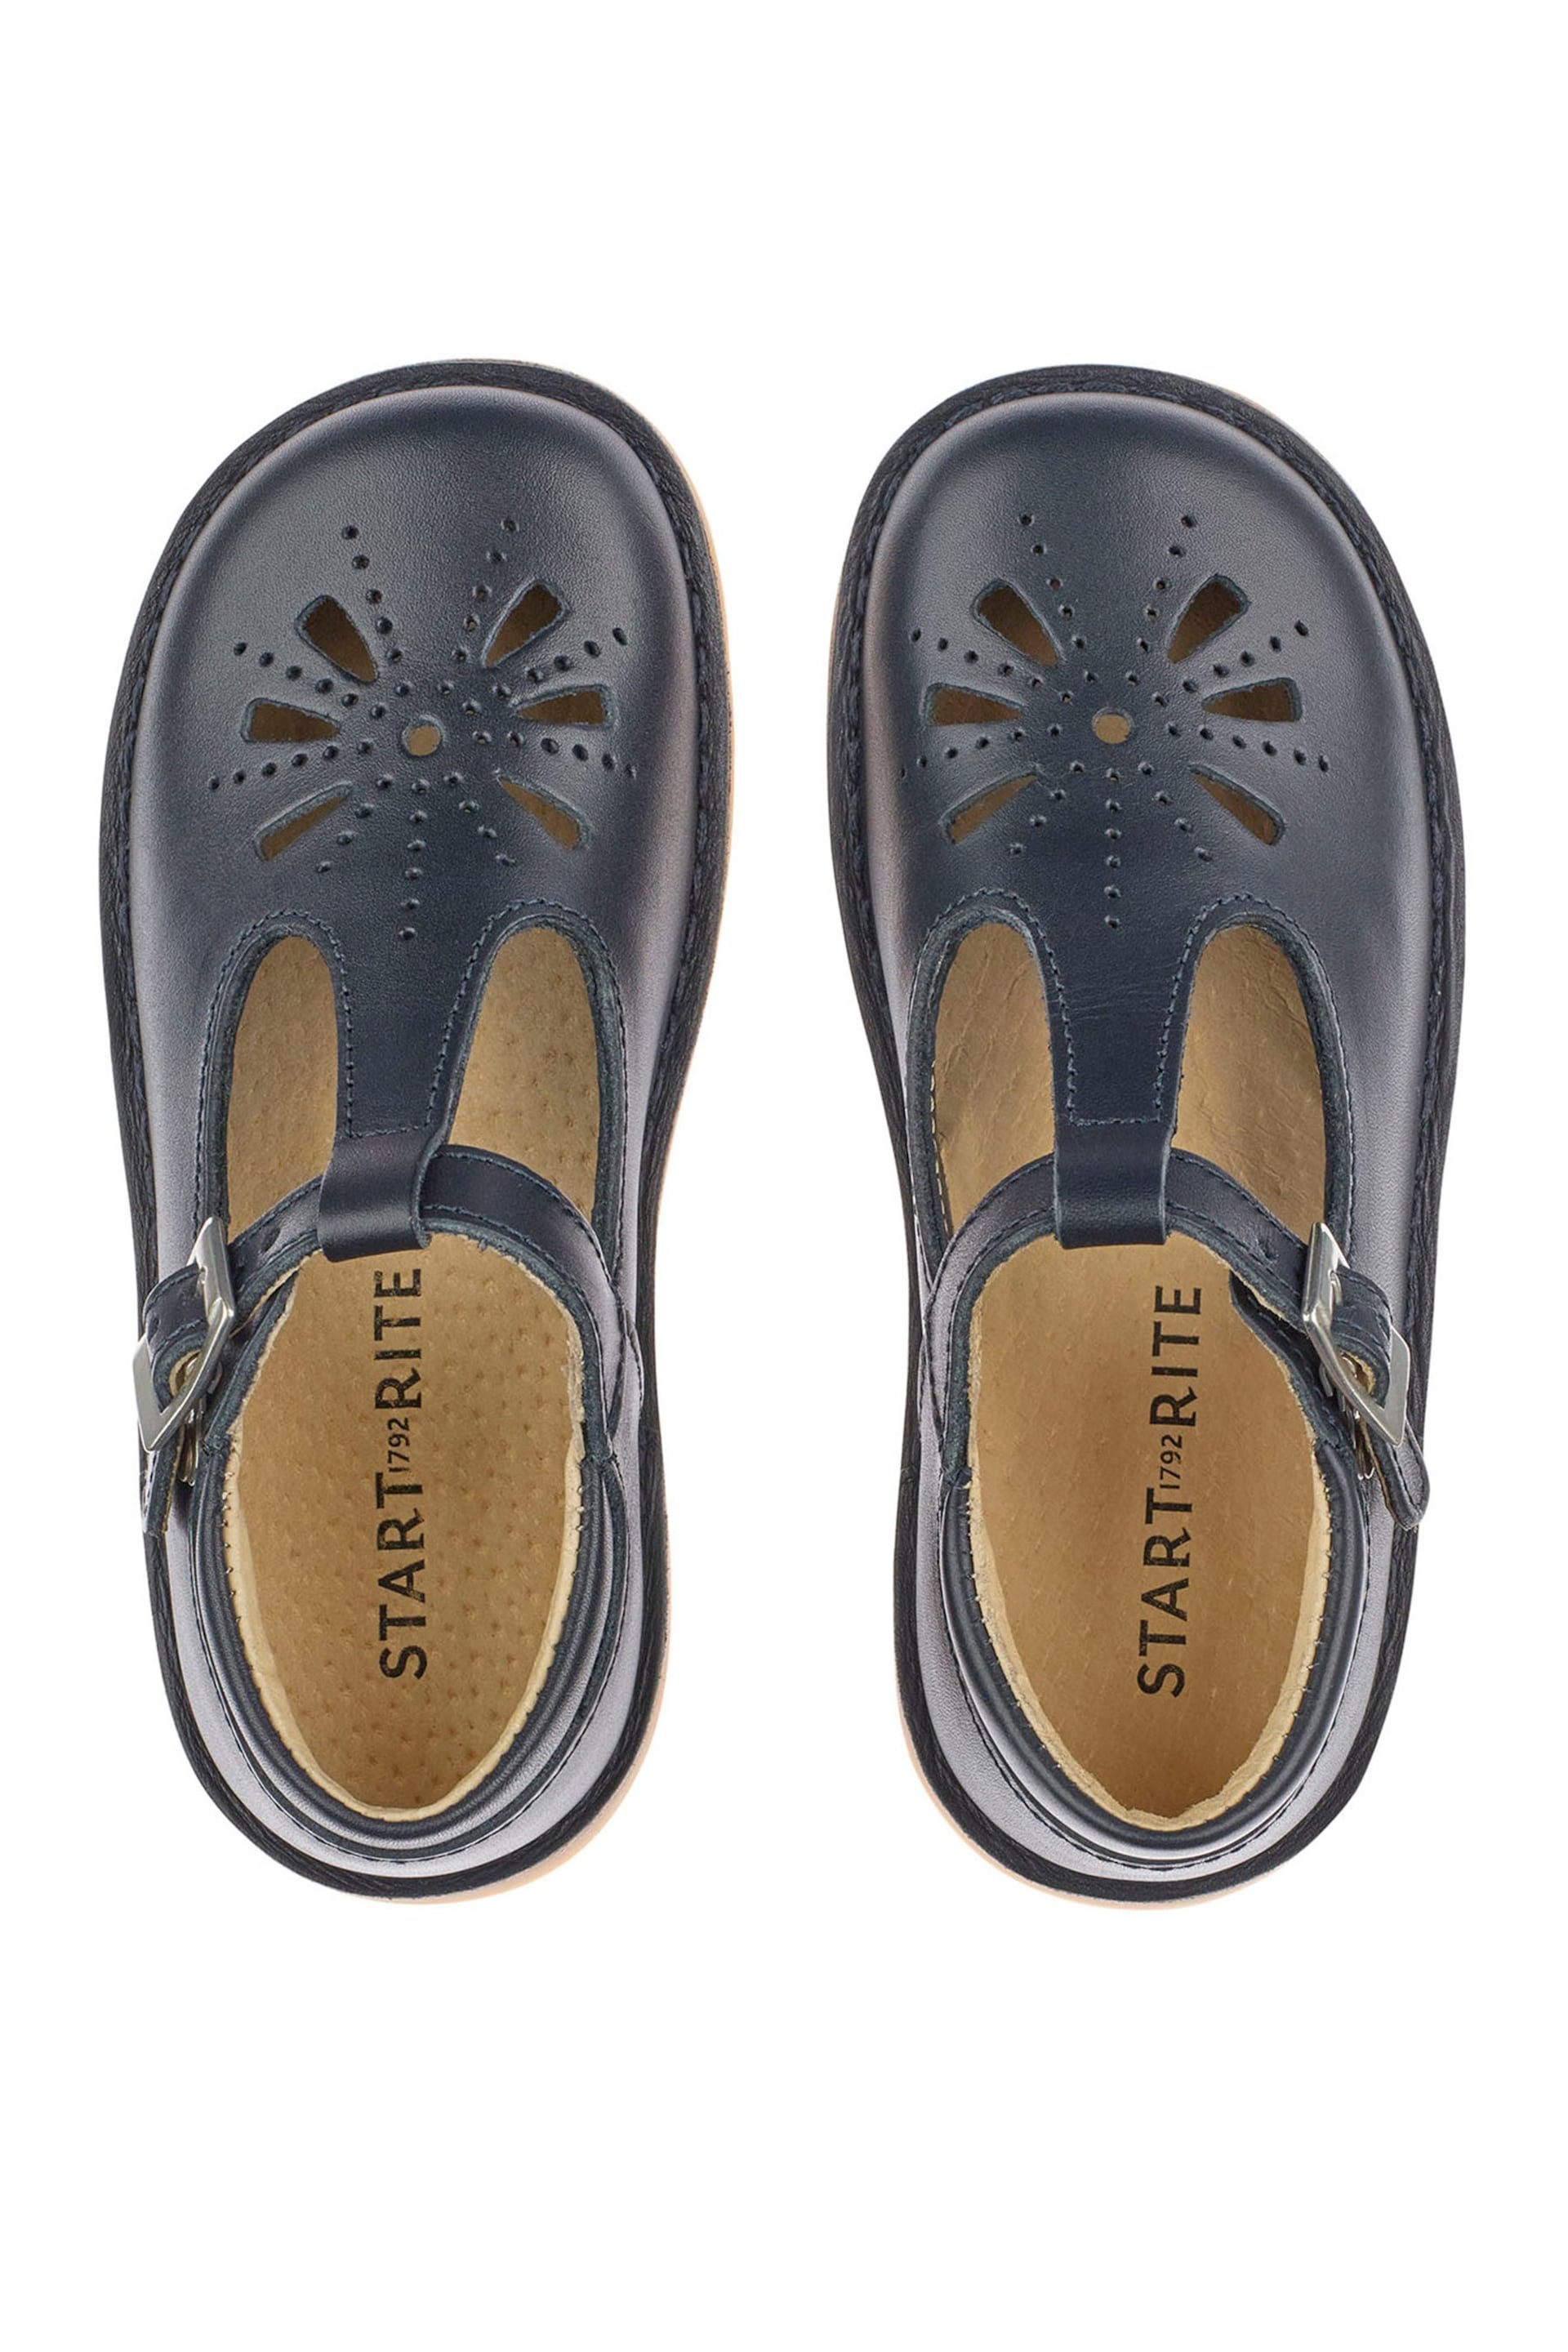 Start-Rite Lottie Navy Leather Classic T-Bar Shoes F Fit - Image 6 of 7